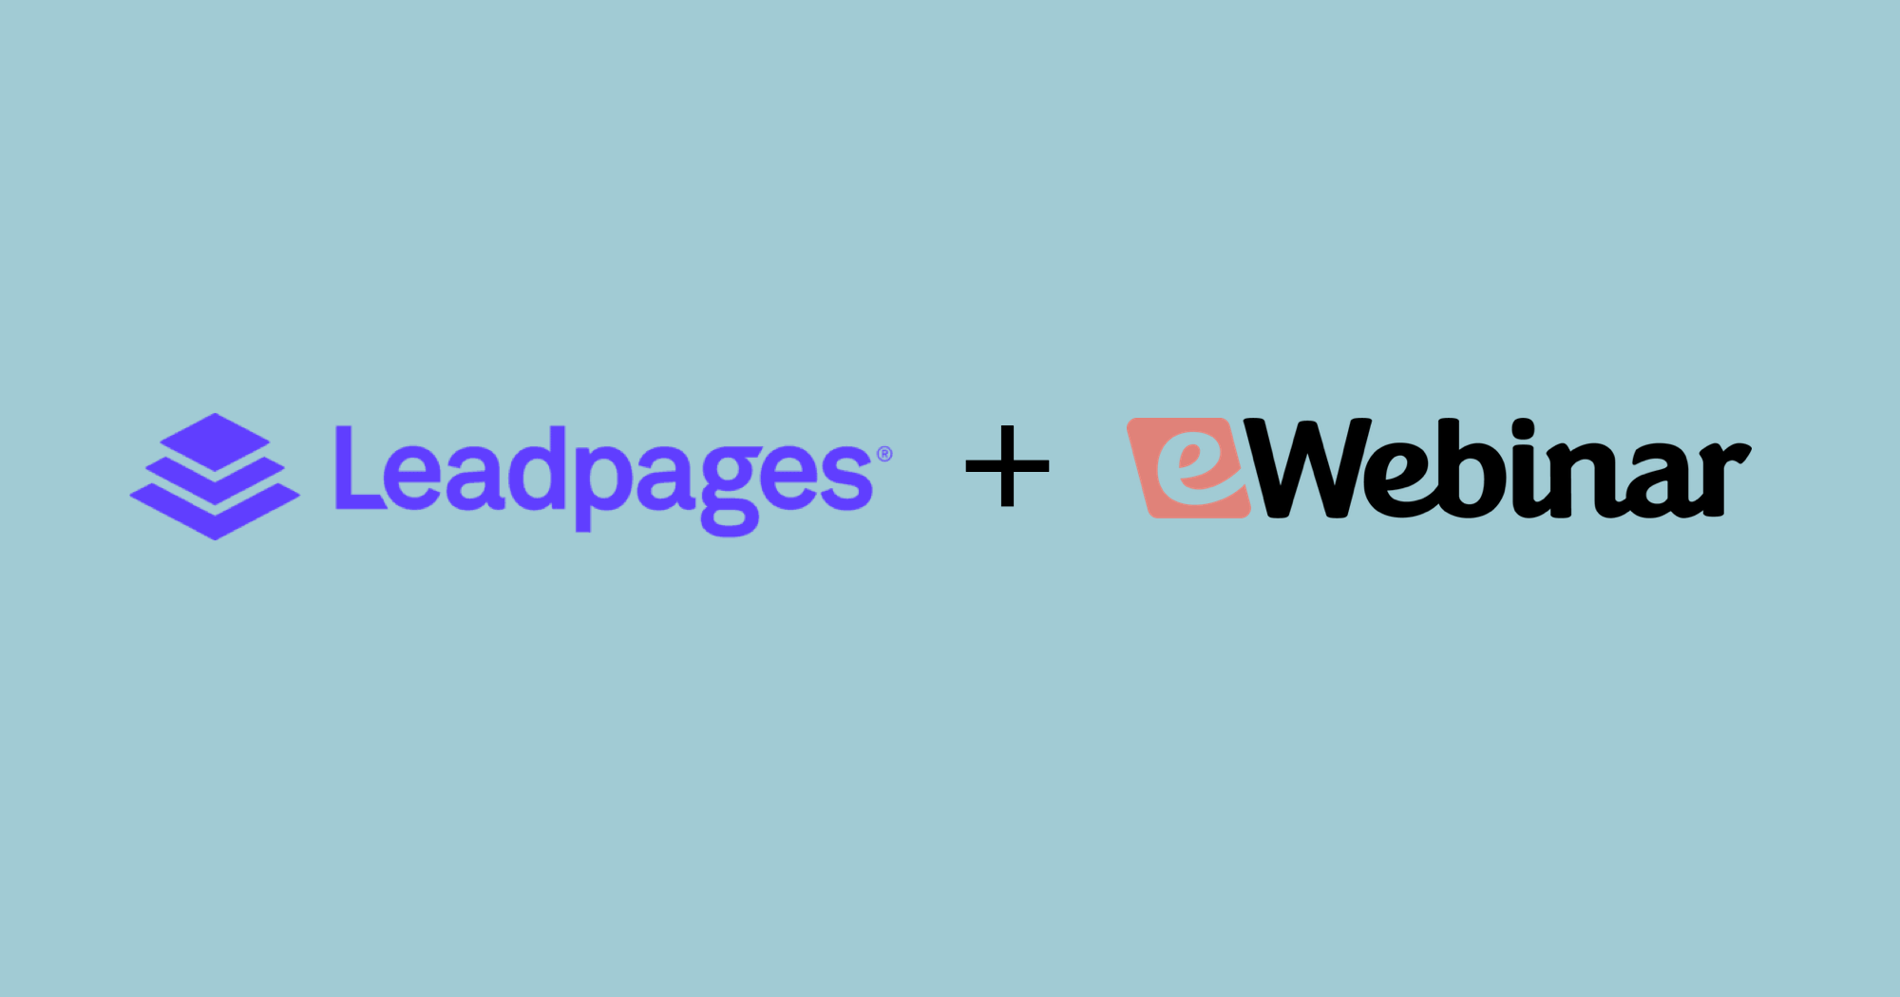 eWebinar Partners with Leadpages